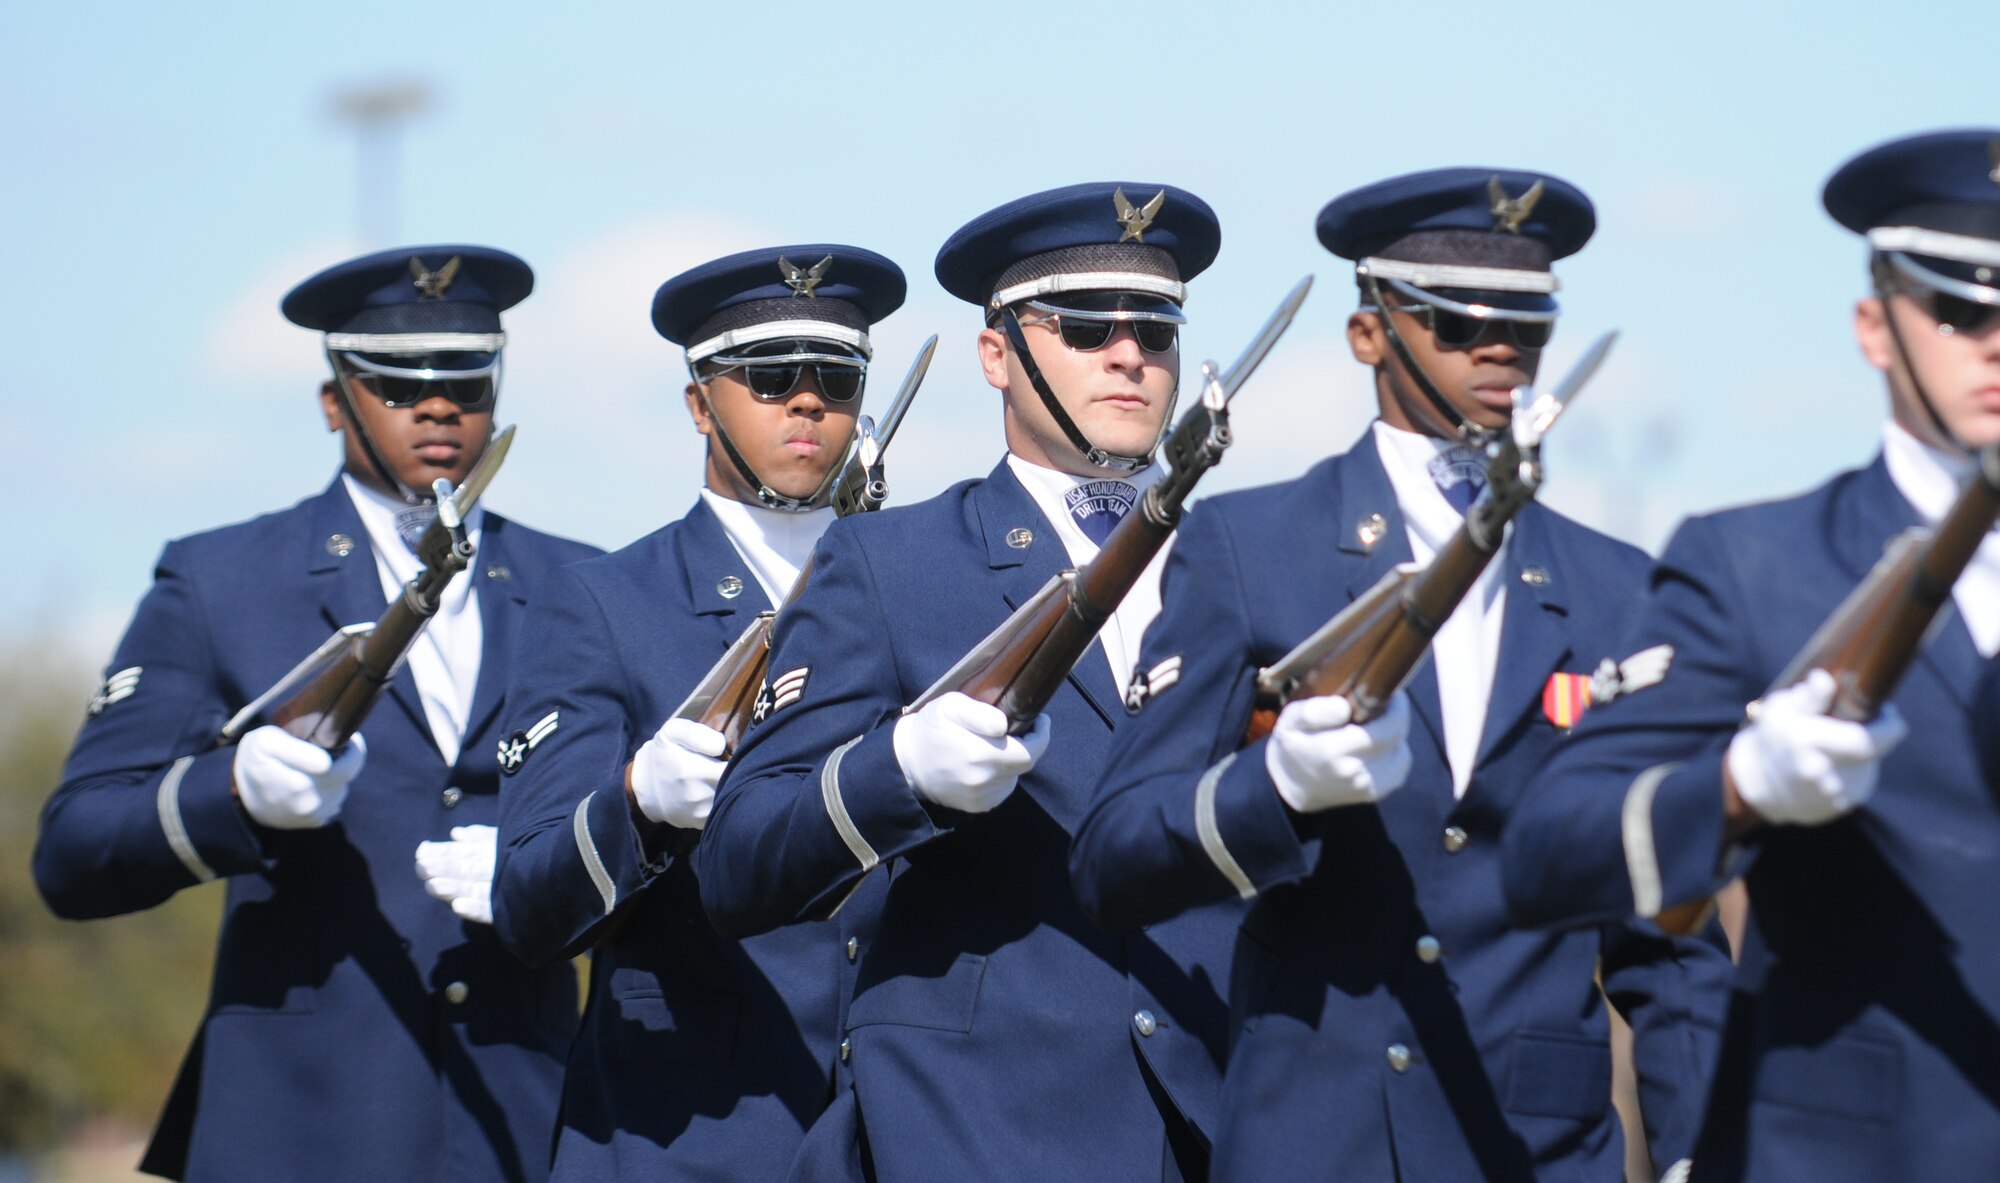 The United States Air Force Honor Guard Drill Team performs for Airmen at Randolph Air Force Base, Texas. on Oct. 30.  The Drill Team tours worldwide representing all Airmen while showcasing Air Force precision and professionalism and personifying the integrity, discipline, and teamwork of every Airman and every Air Force mission. During the Air Force Honor Guard's 60-year history, their traveling component, the Drill Team, has performed in every state of the union and many countries abroad. (U.S. Air Force photo by Senior Airman Sean Adams) 